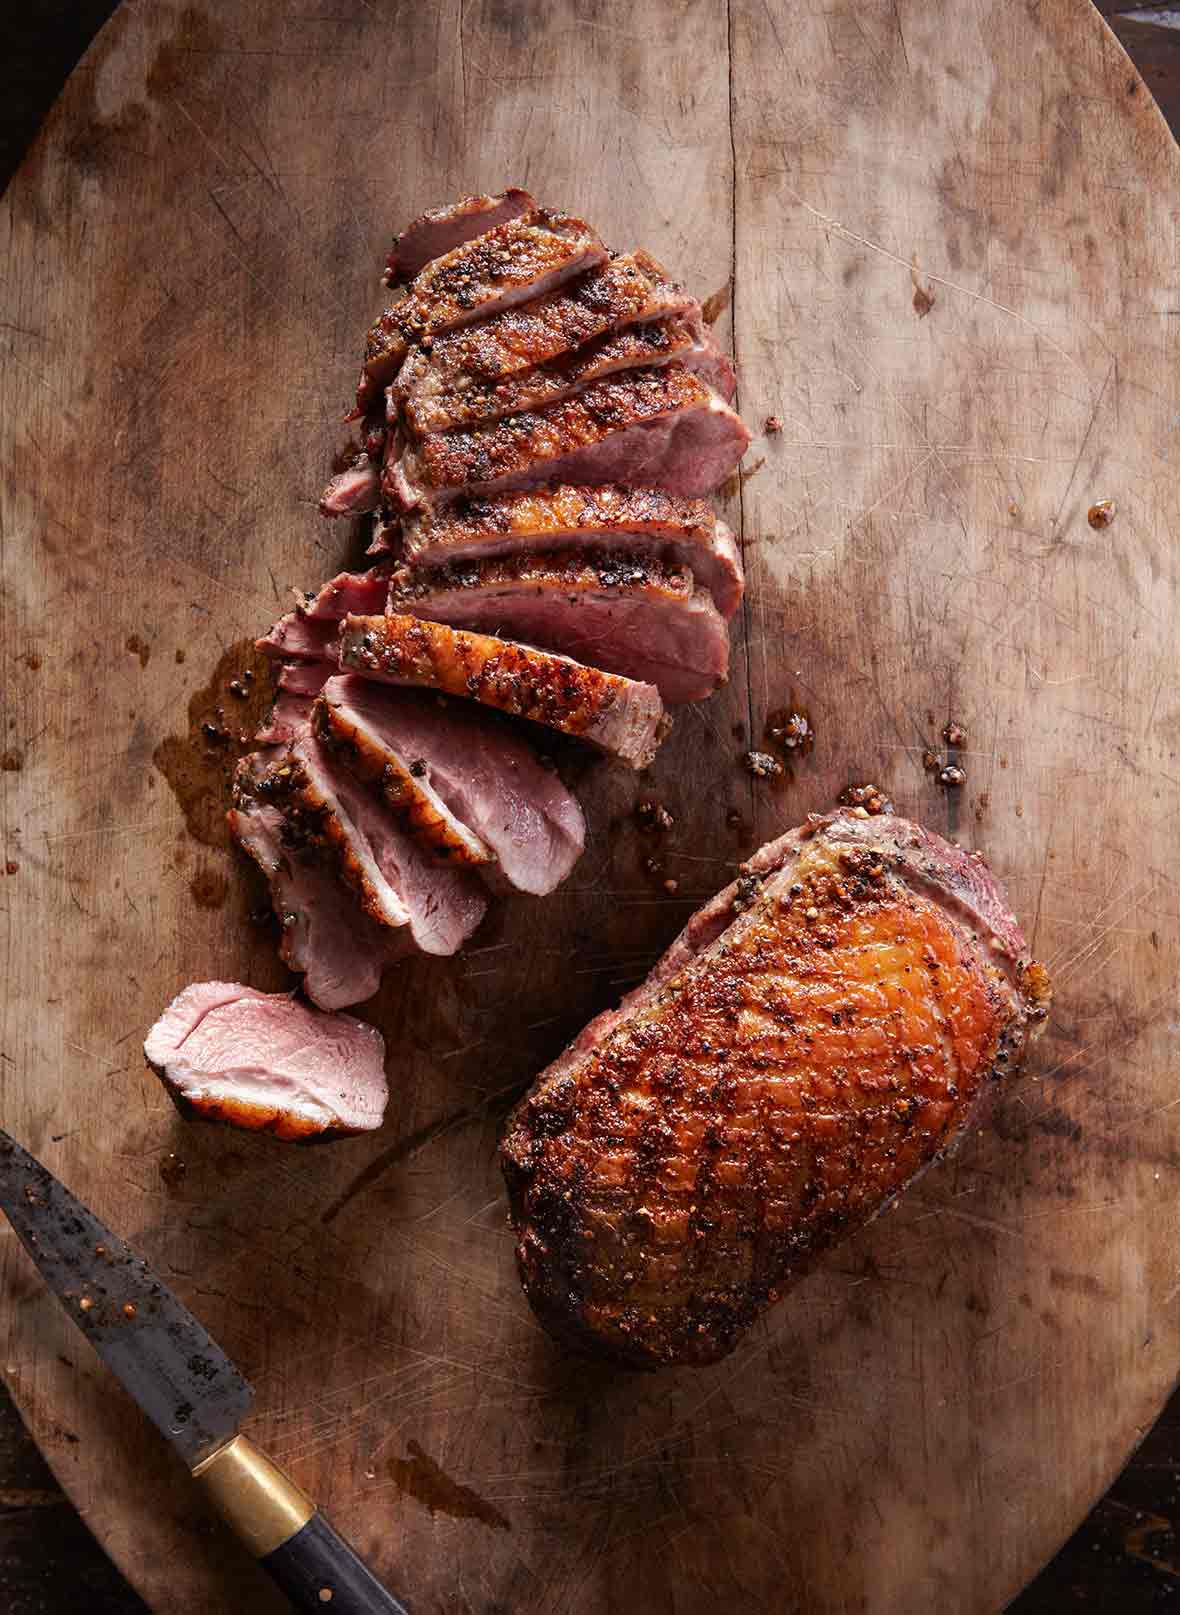 Two seared duck breasts, one sliced, the other whole on a wood cutting board